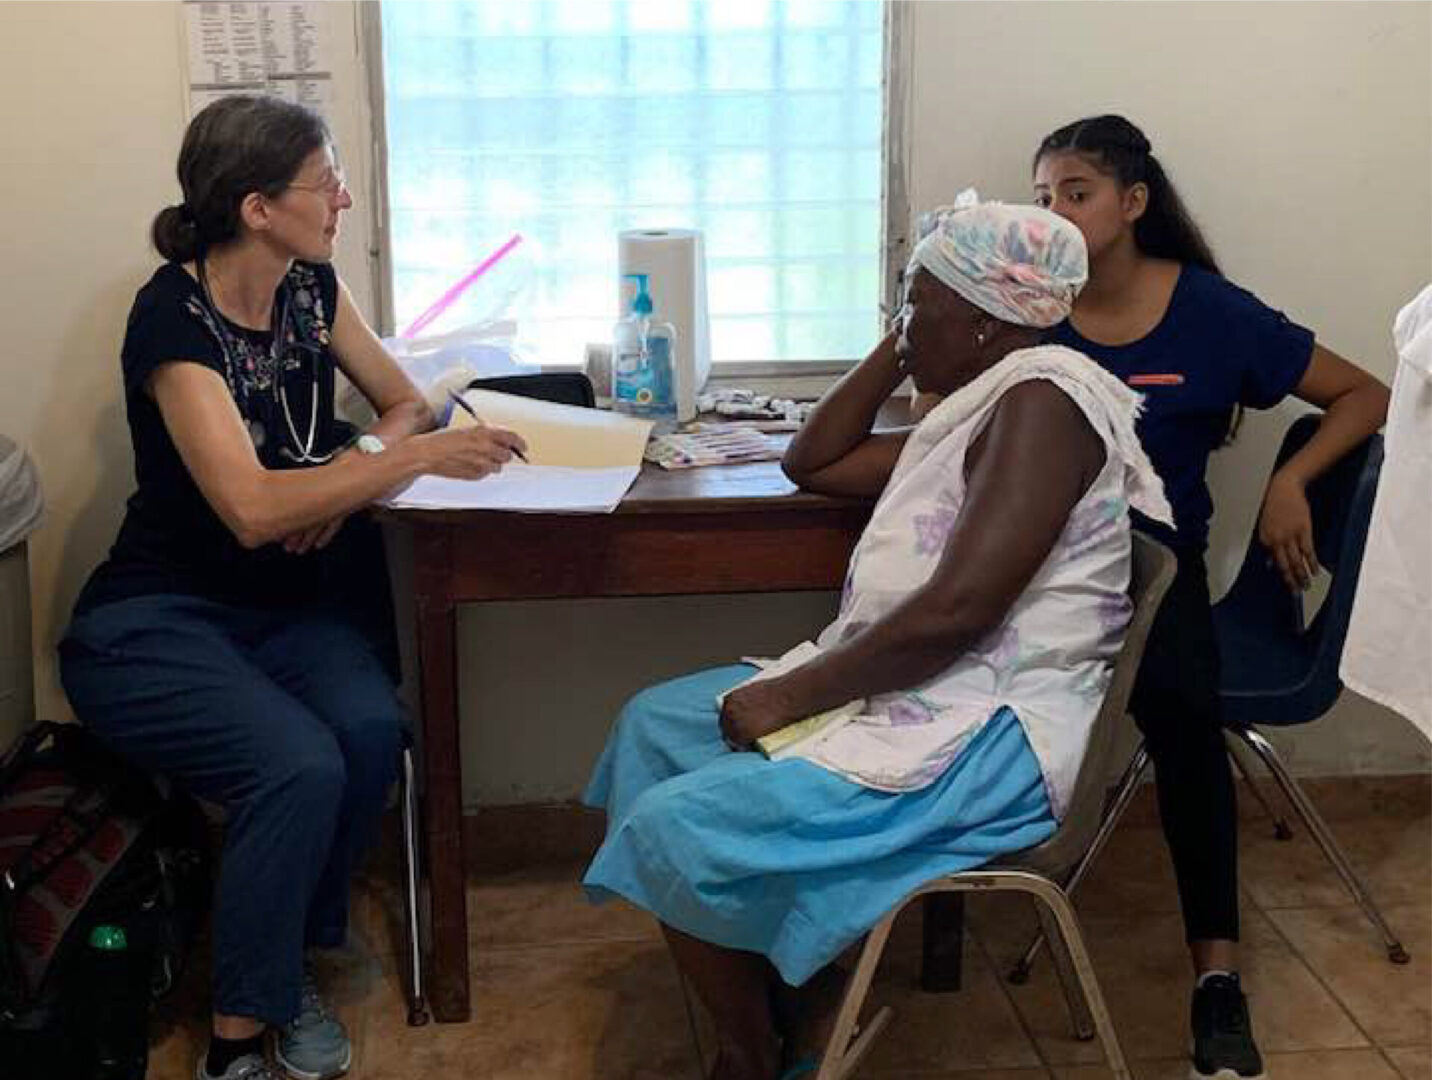 An older woman getting her check up, accompanied by a younger woman